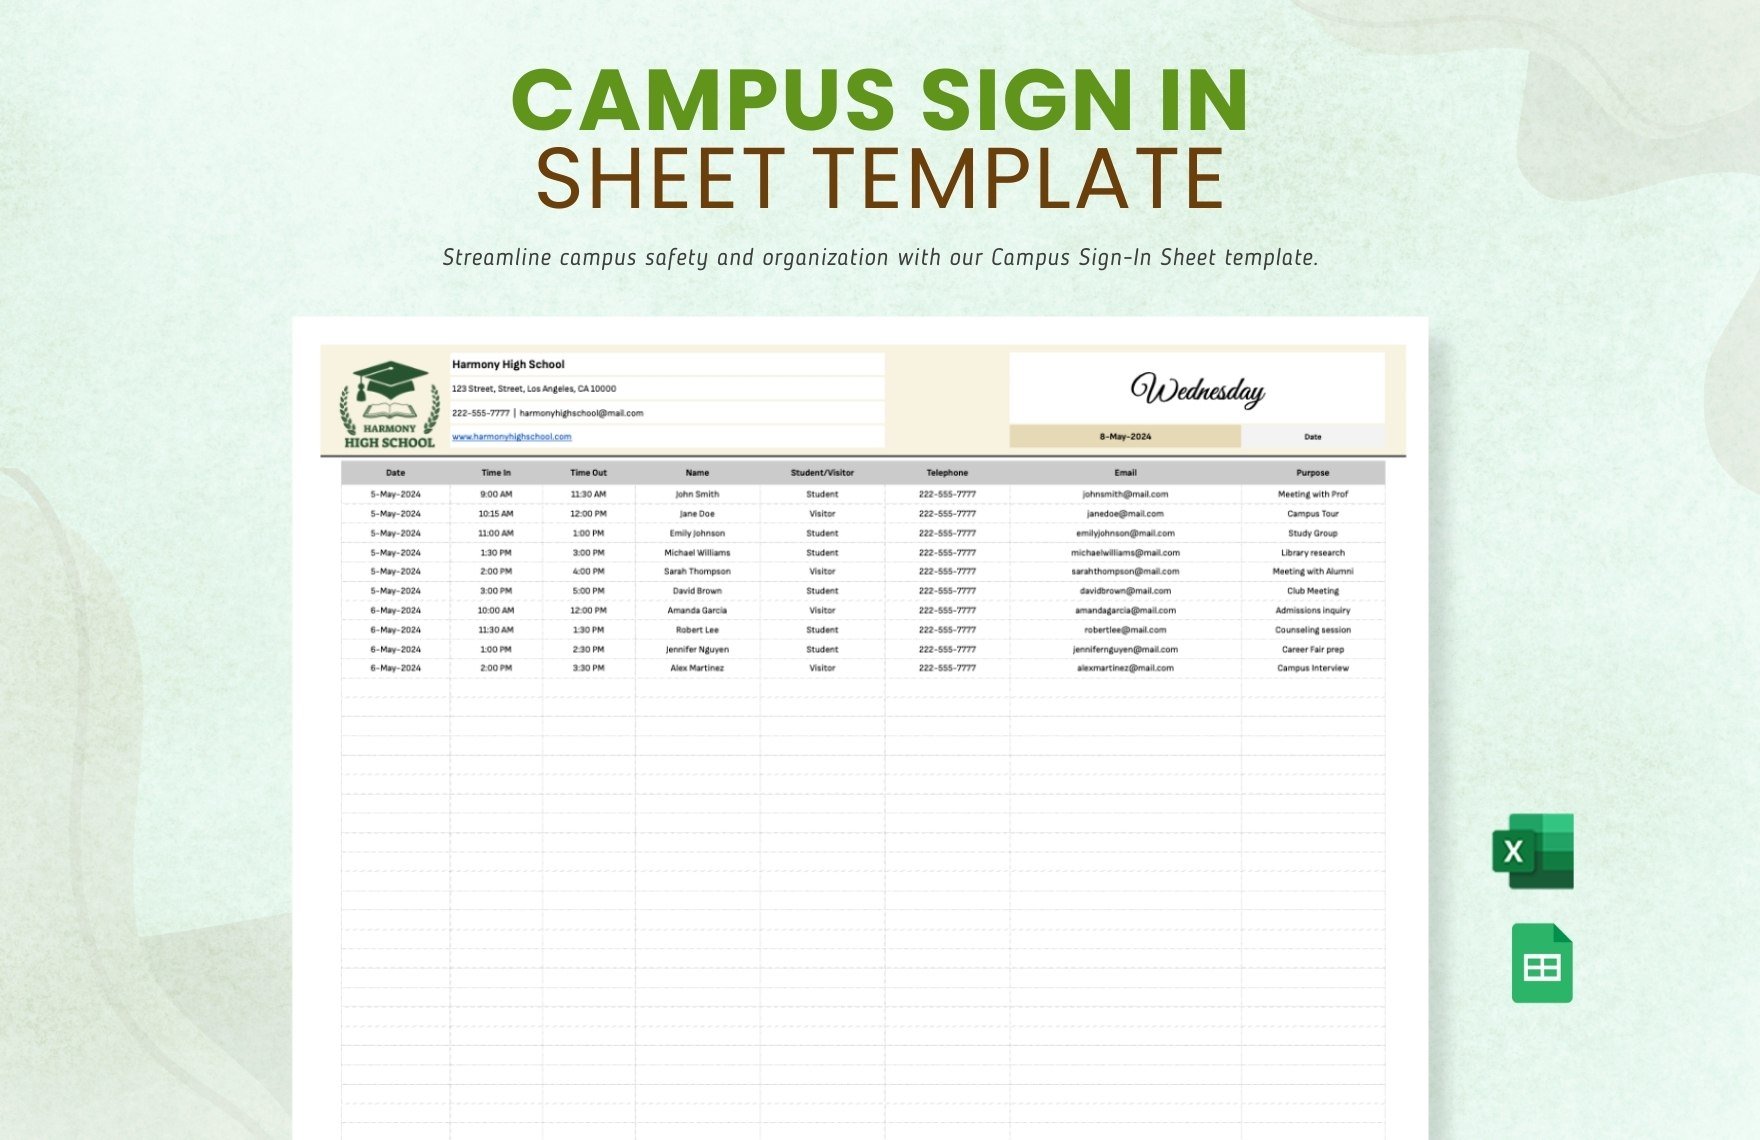 Campus Sign in Sheet Template in Excel, Google Sheets